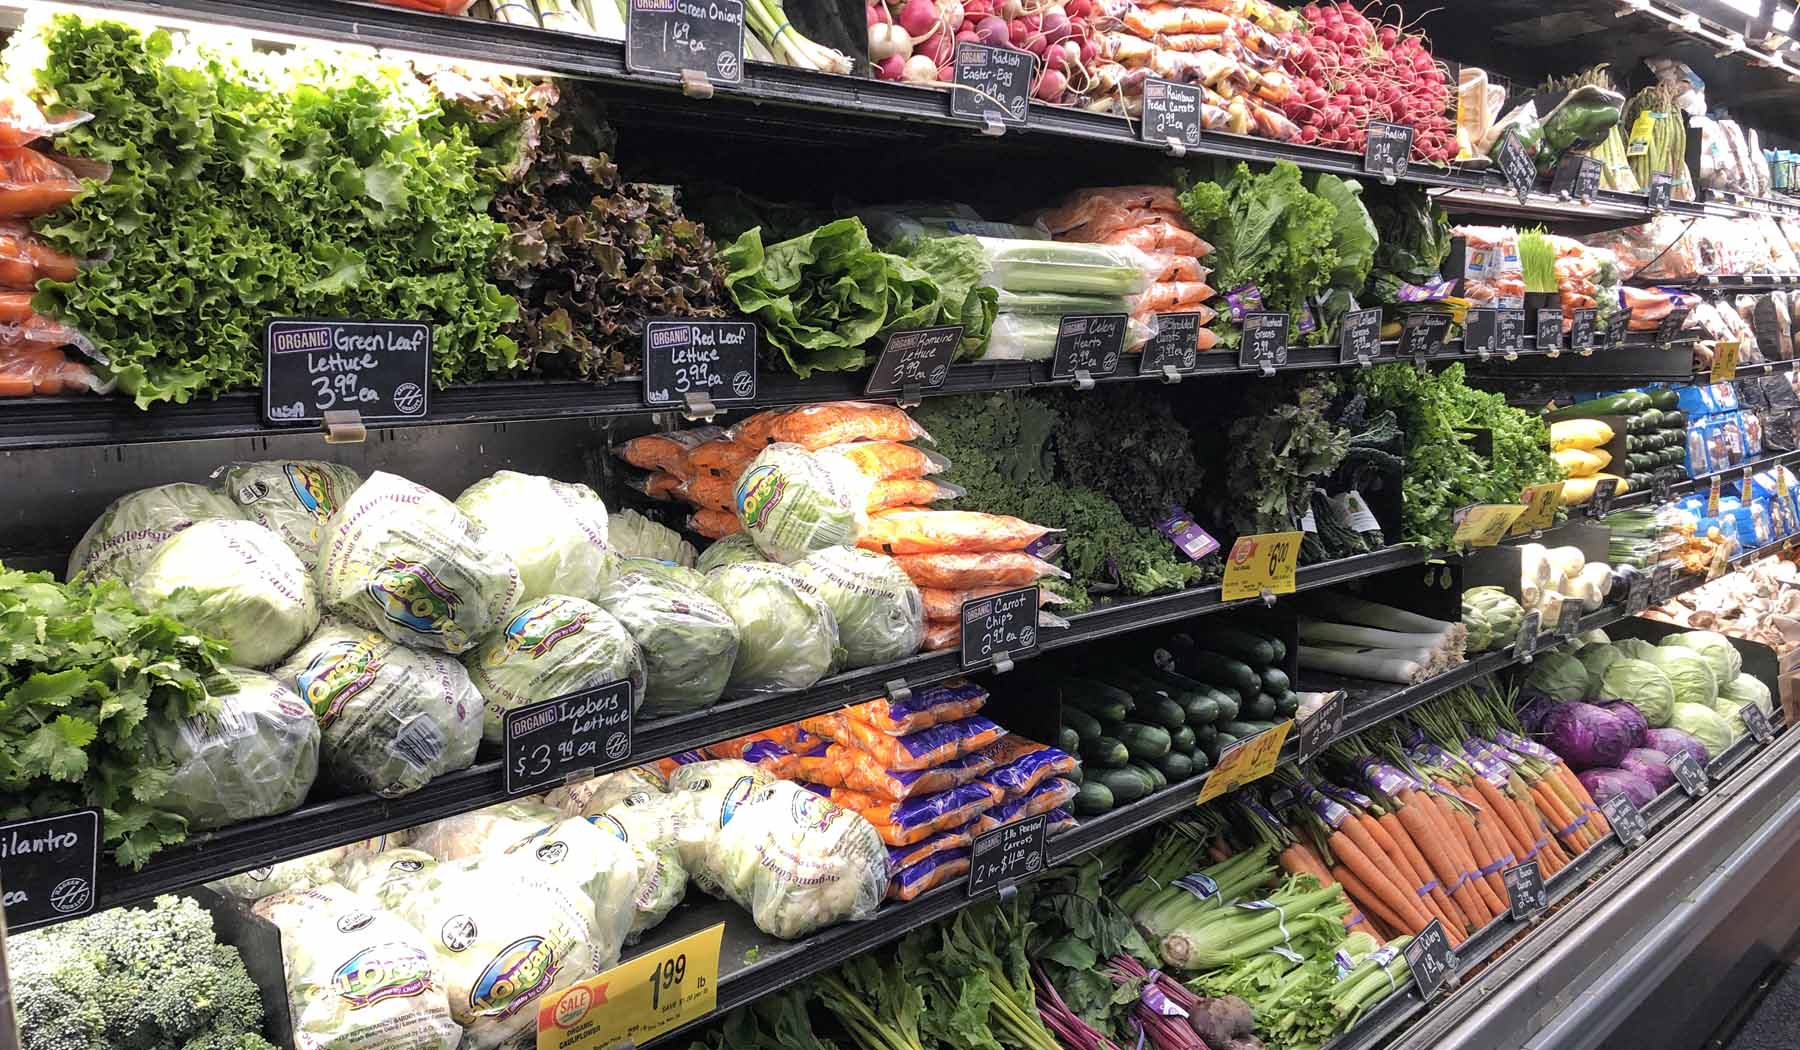 Shelves of produce in a grocery store